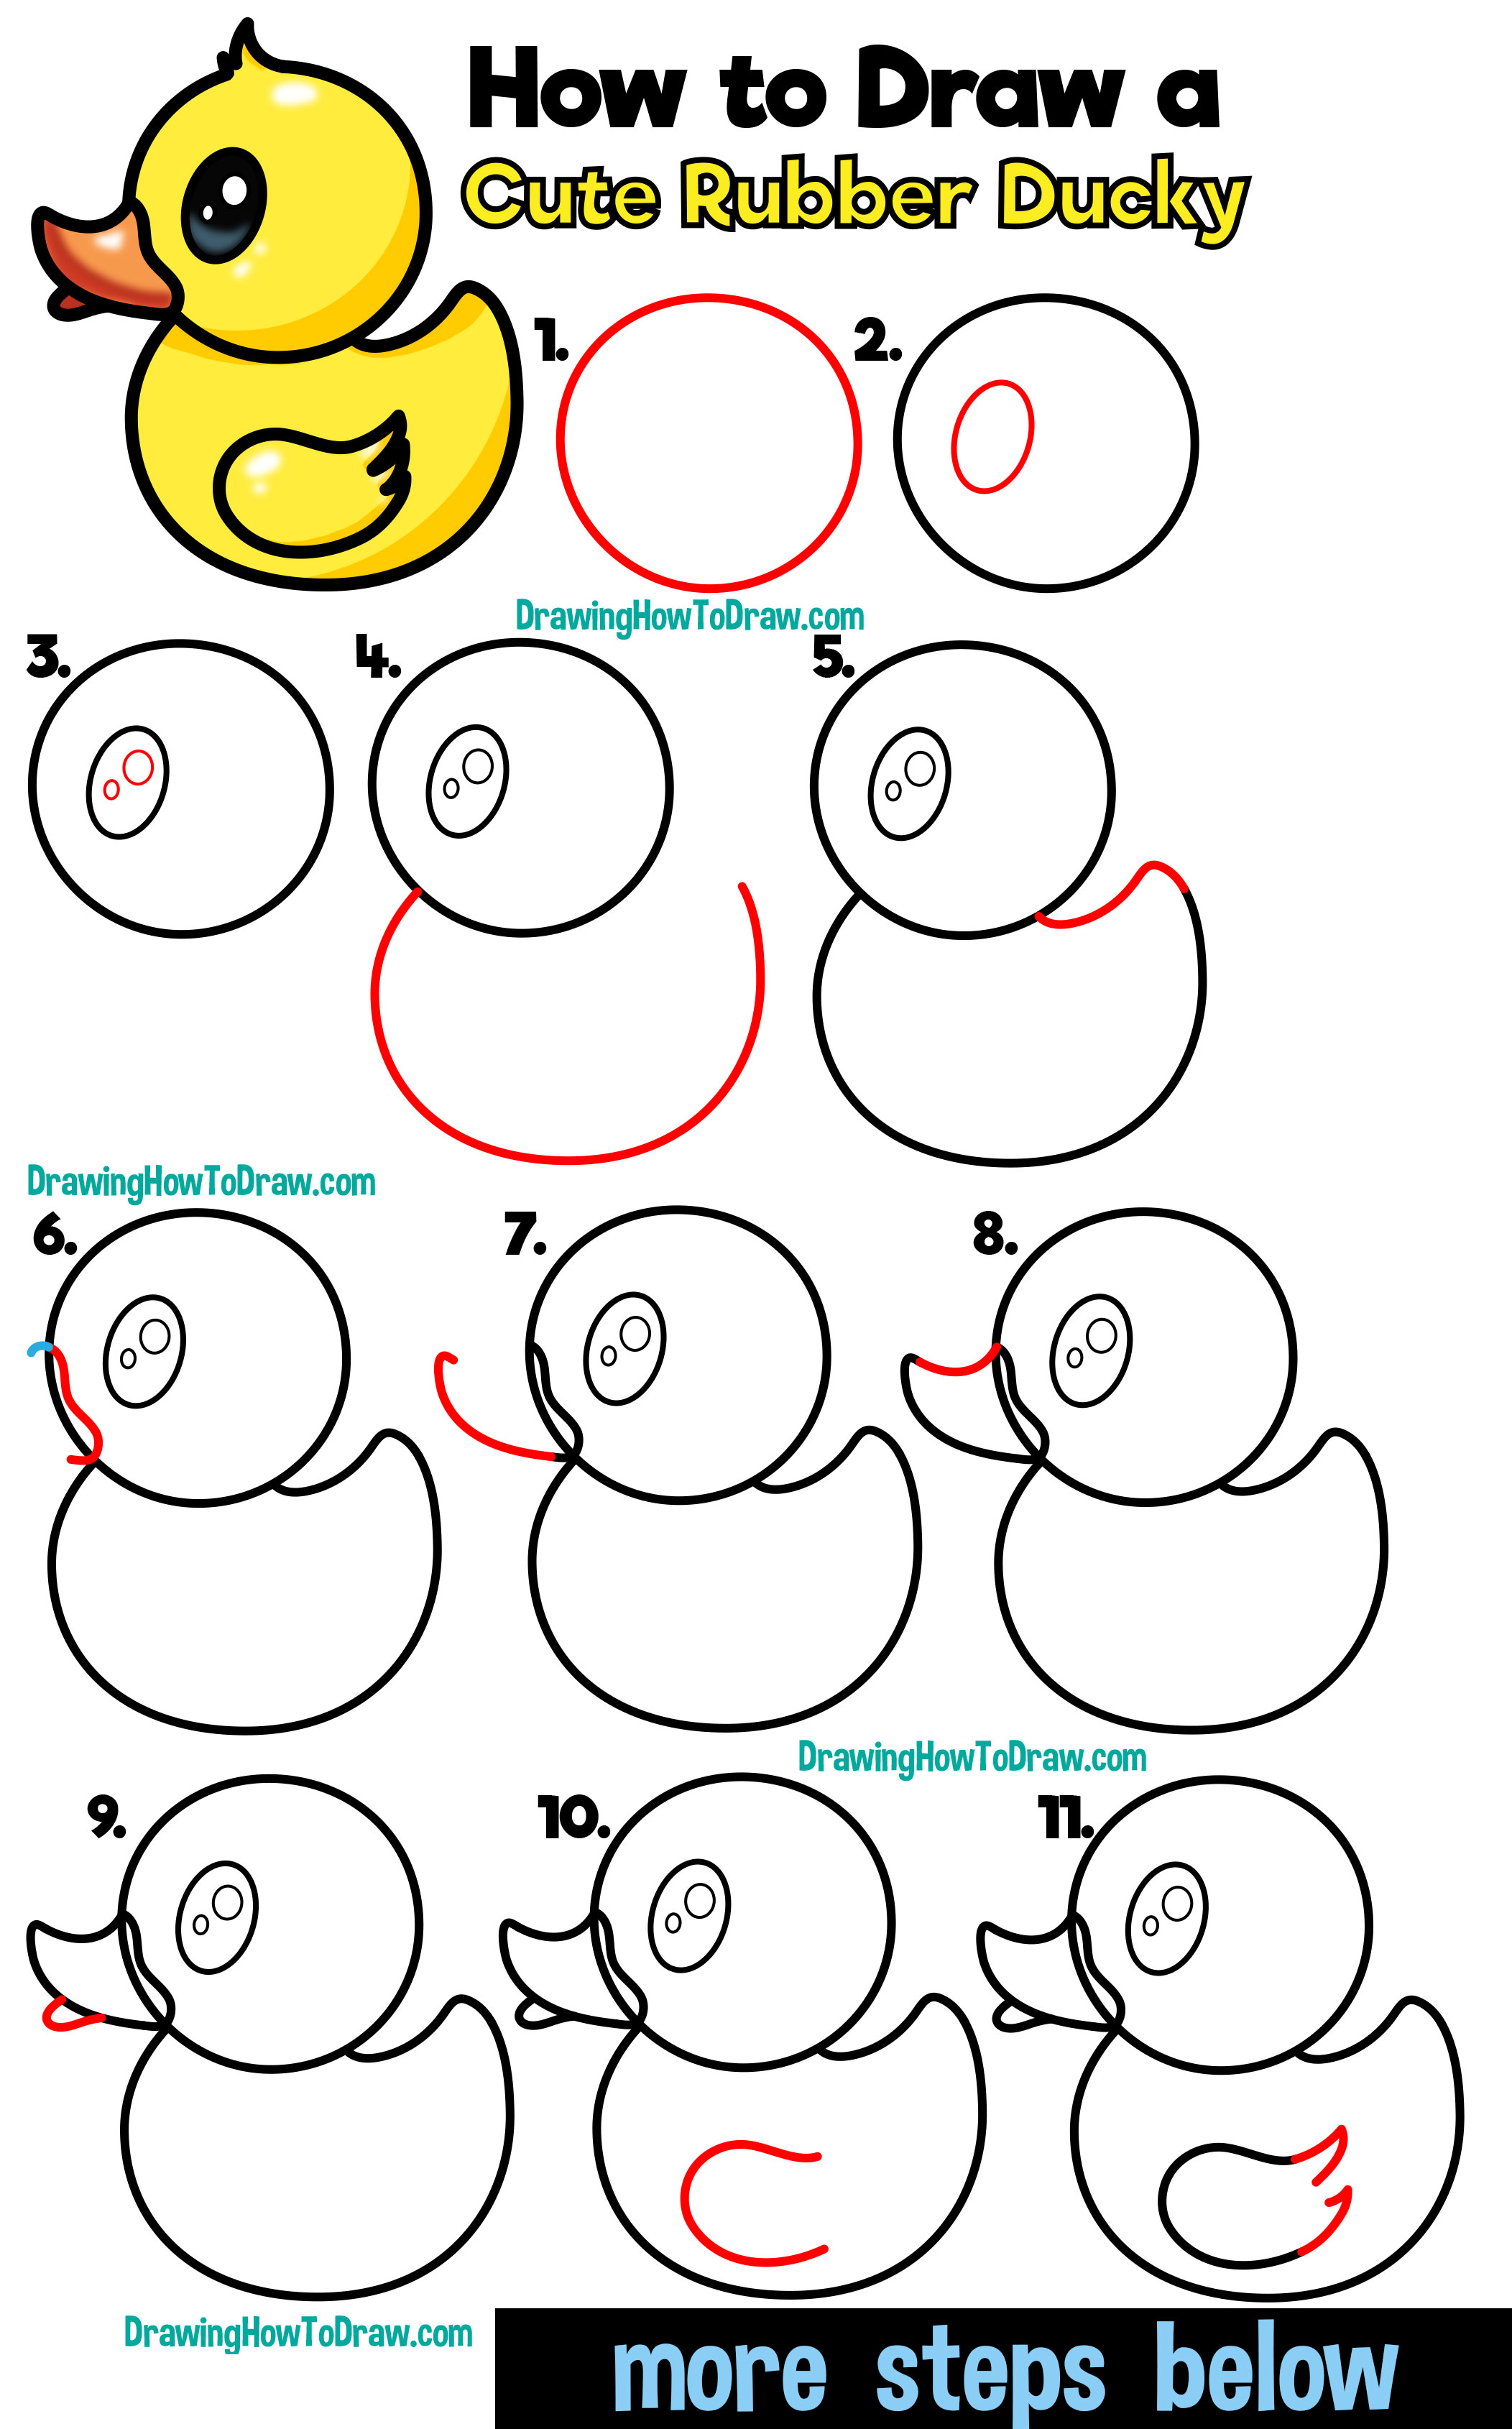 How to Draw a Cute Cartoon Rubber Ducky Easy Step by Step Drawing for